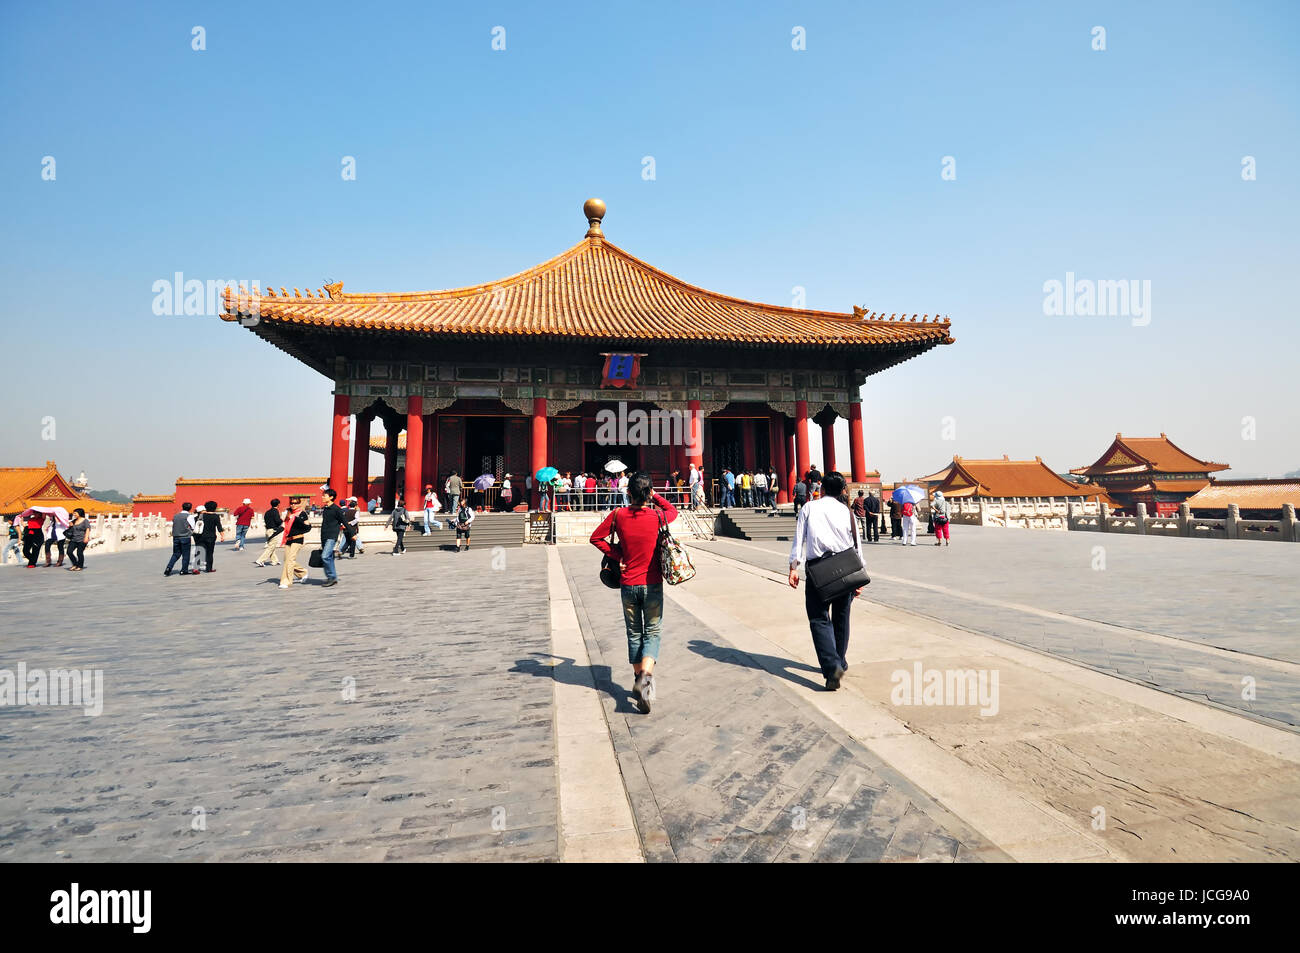 Beijing, China - September 22, 2009: Tourists at the Forbidden city, Chinese imperial palace from the Ming dynasty to Qing dynasty. It is China's most Stock Photo